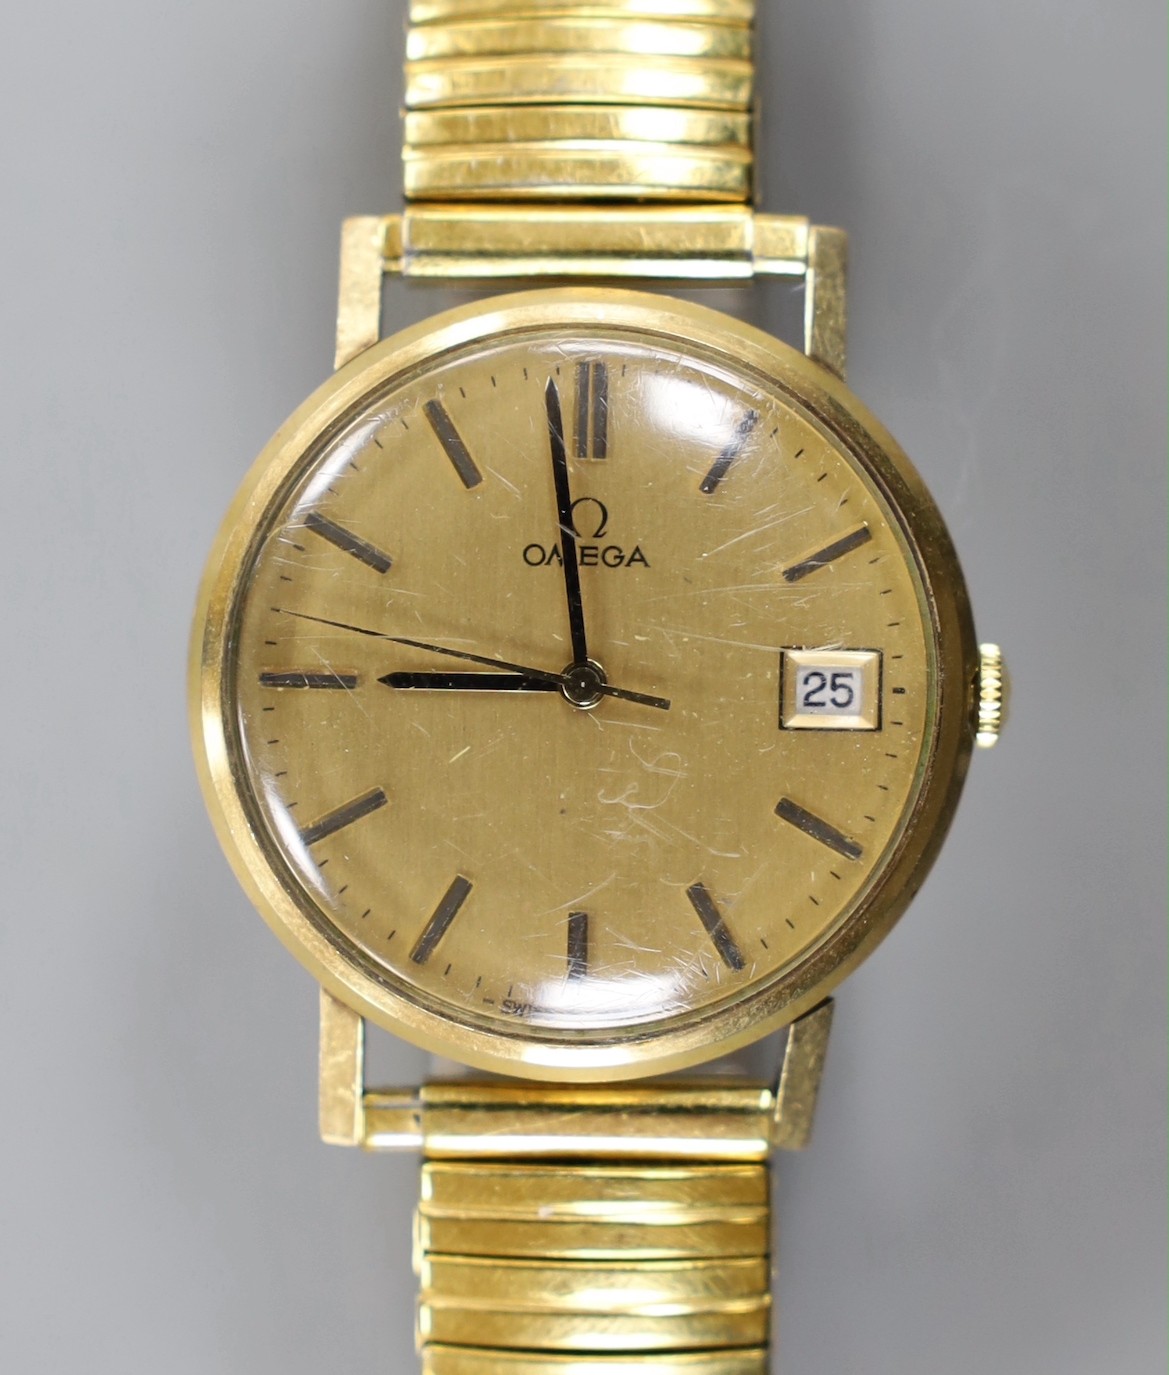 A gentleman's 1960' yellow metal Omega manual wind wrist watch, with date aperture, on associated flexible bracelet, no box or papers.